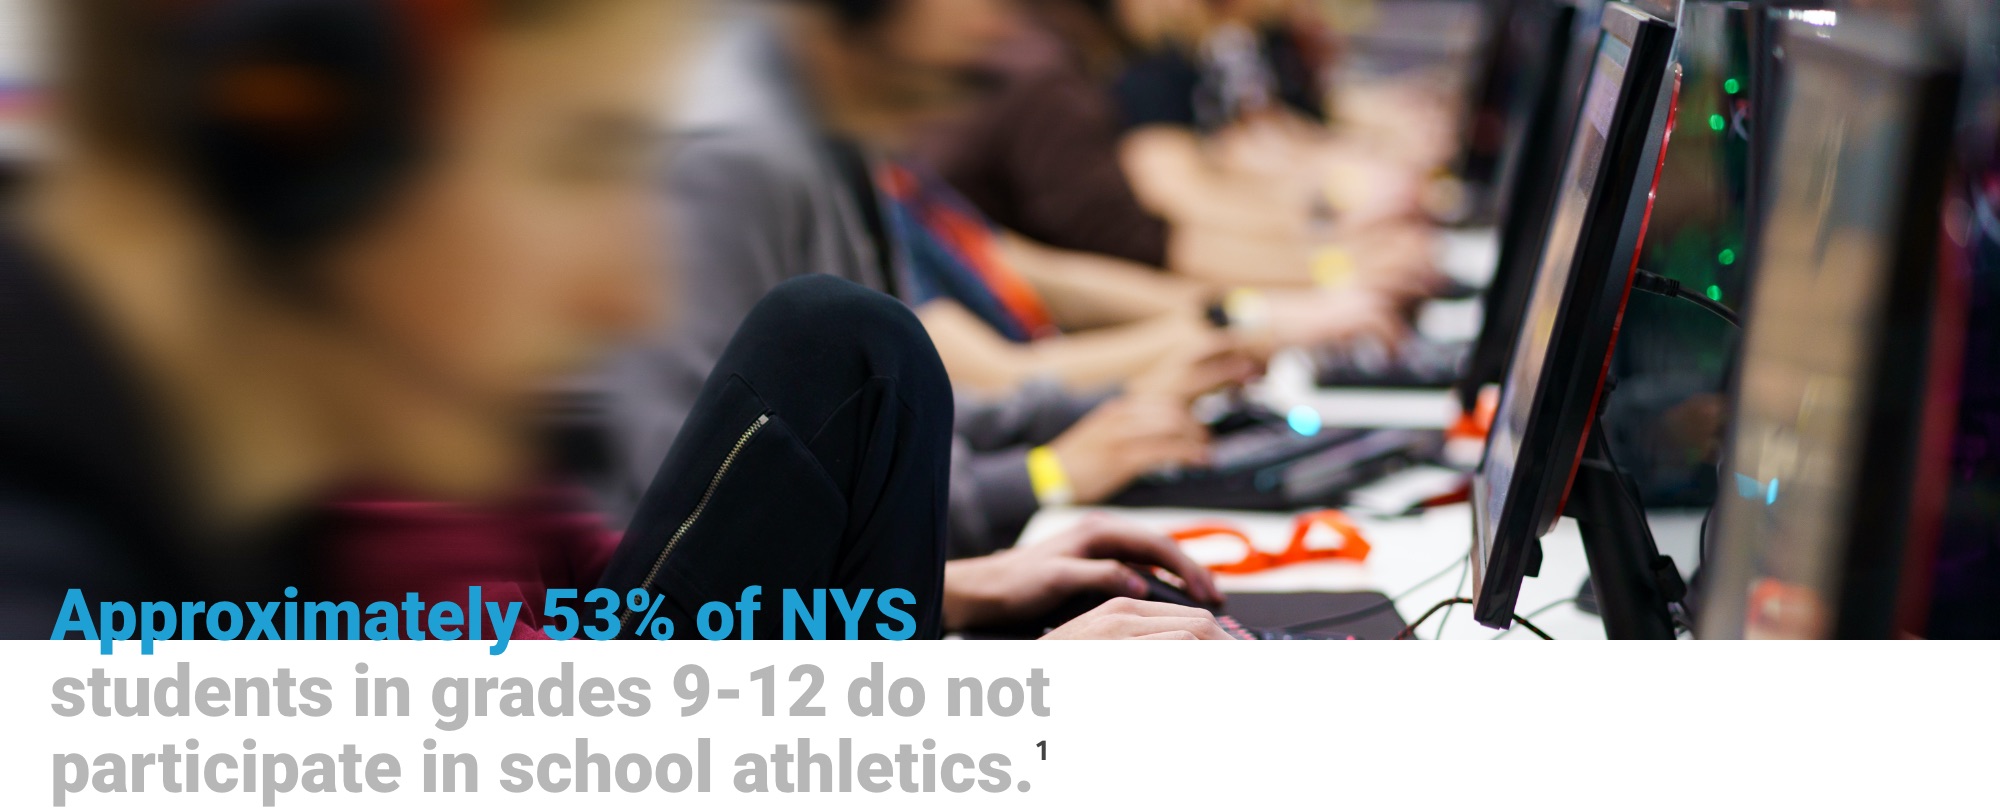 Approximately 53% of NYS students in grades 9-12 do not participate in school athletics. 